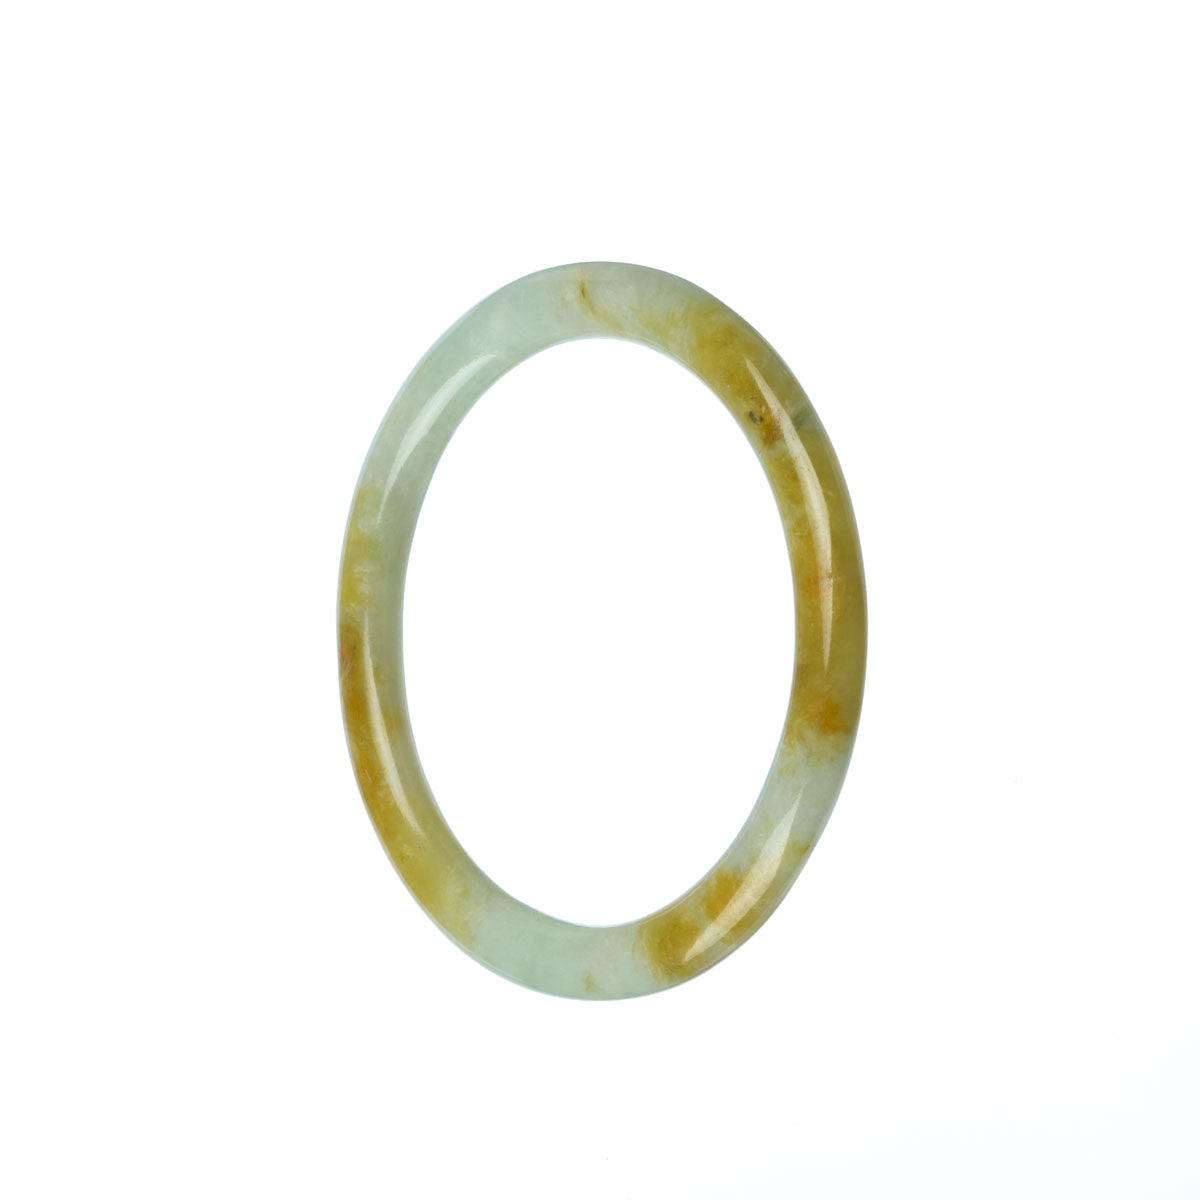 A small round jade bangle bracelet in a beautiful shade of green, made from high-quality Grade A Burma jade. Perfect for petite wrists, this bracelet adds a touch of elegance to any outfit.